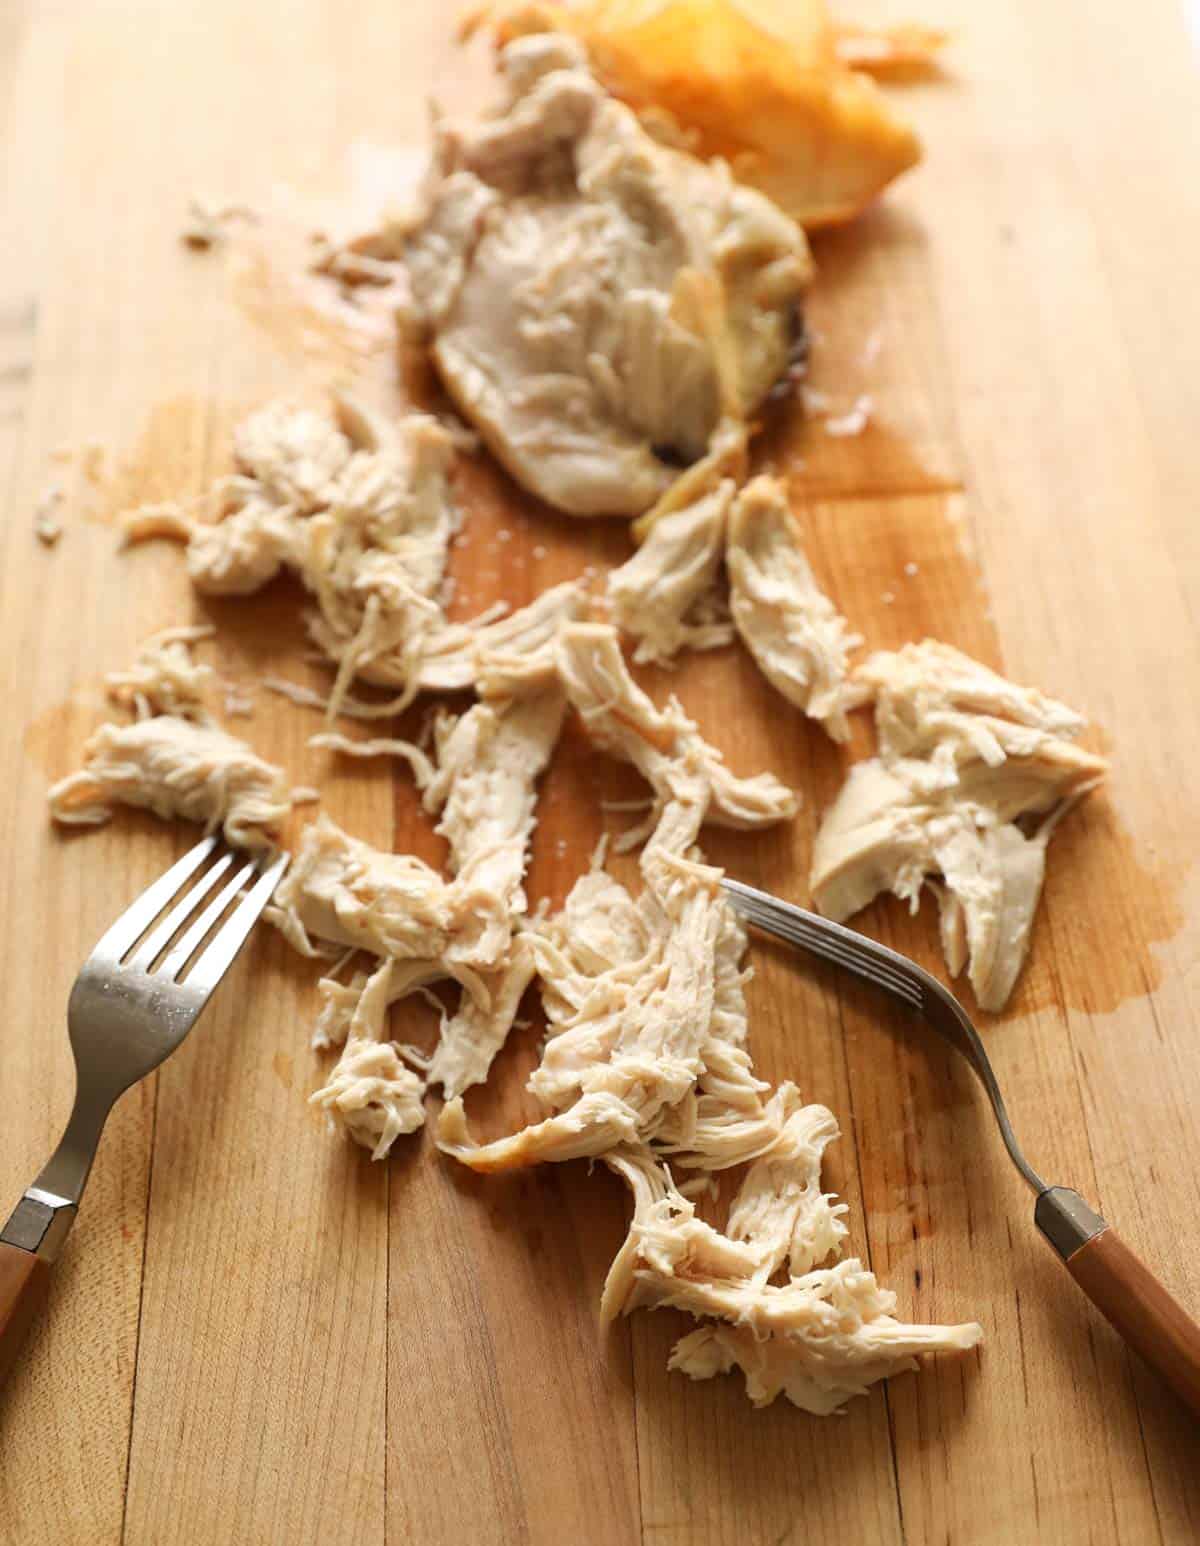 Chicken being shredded with two forks